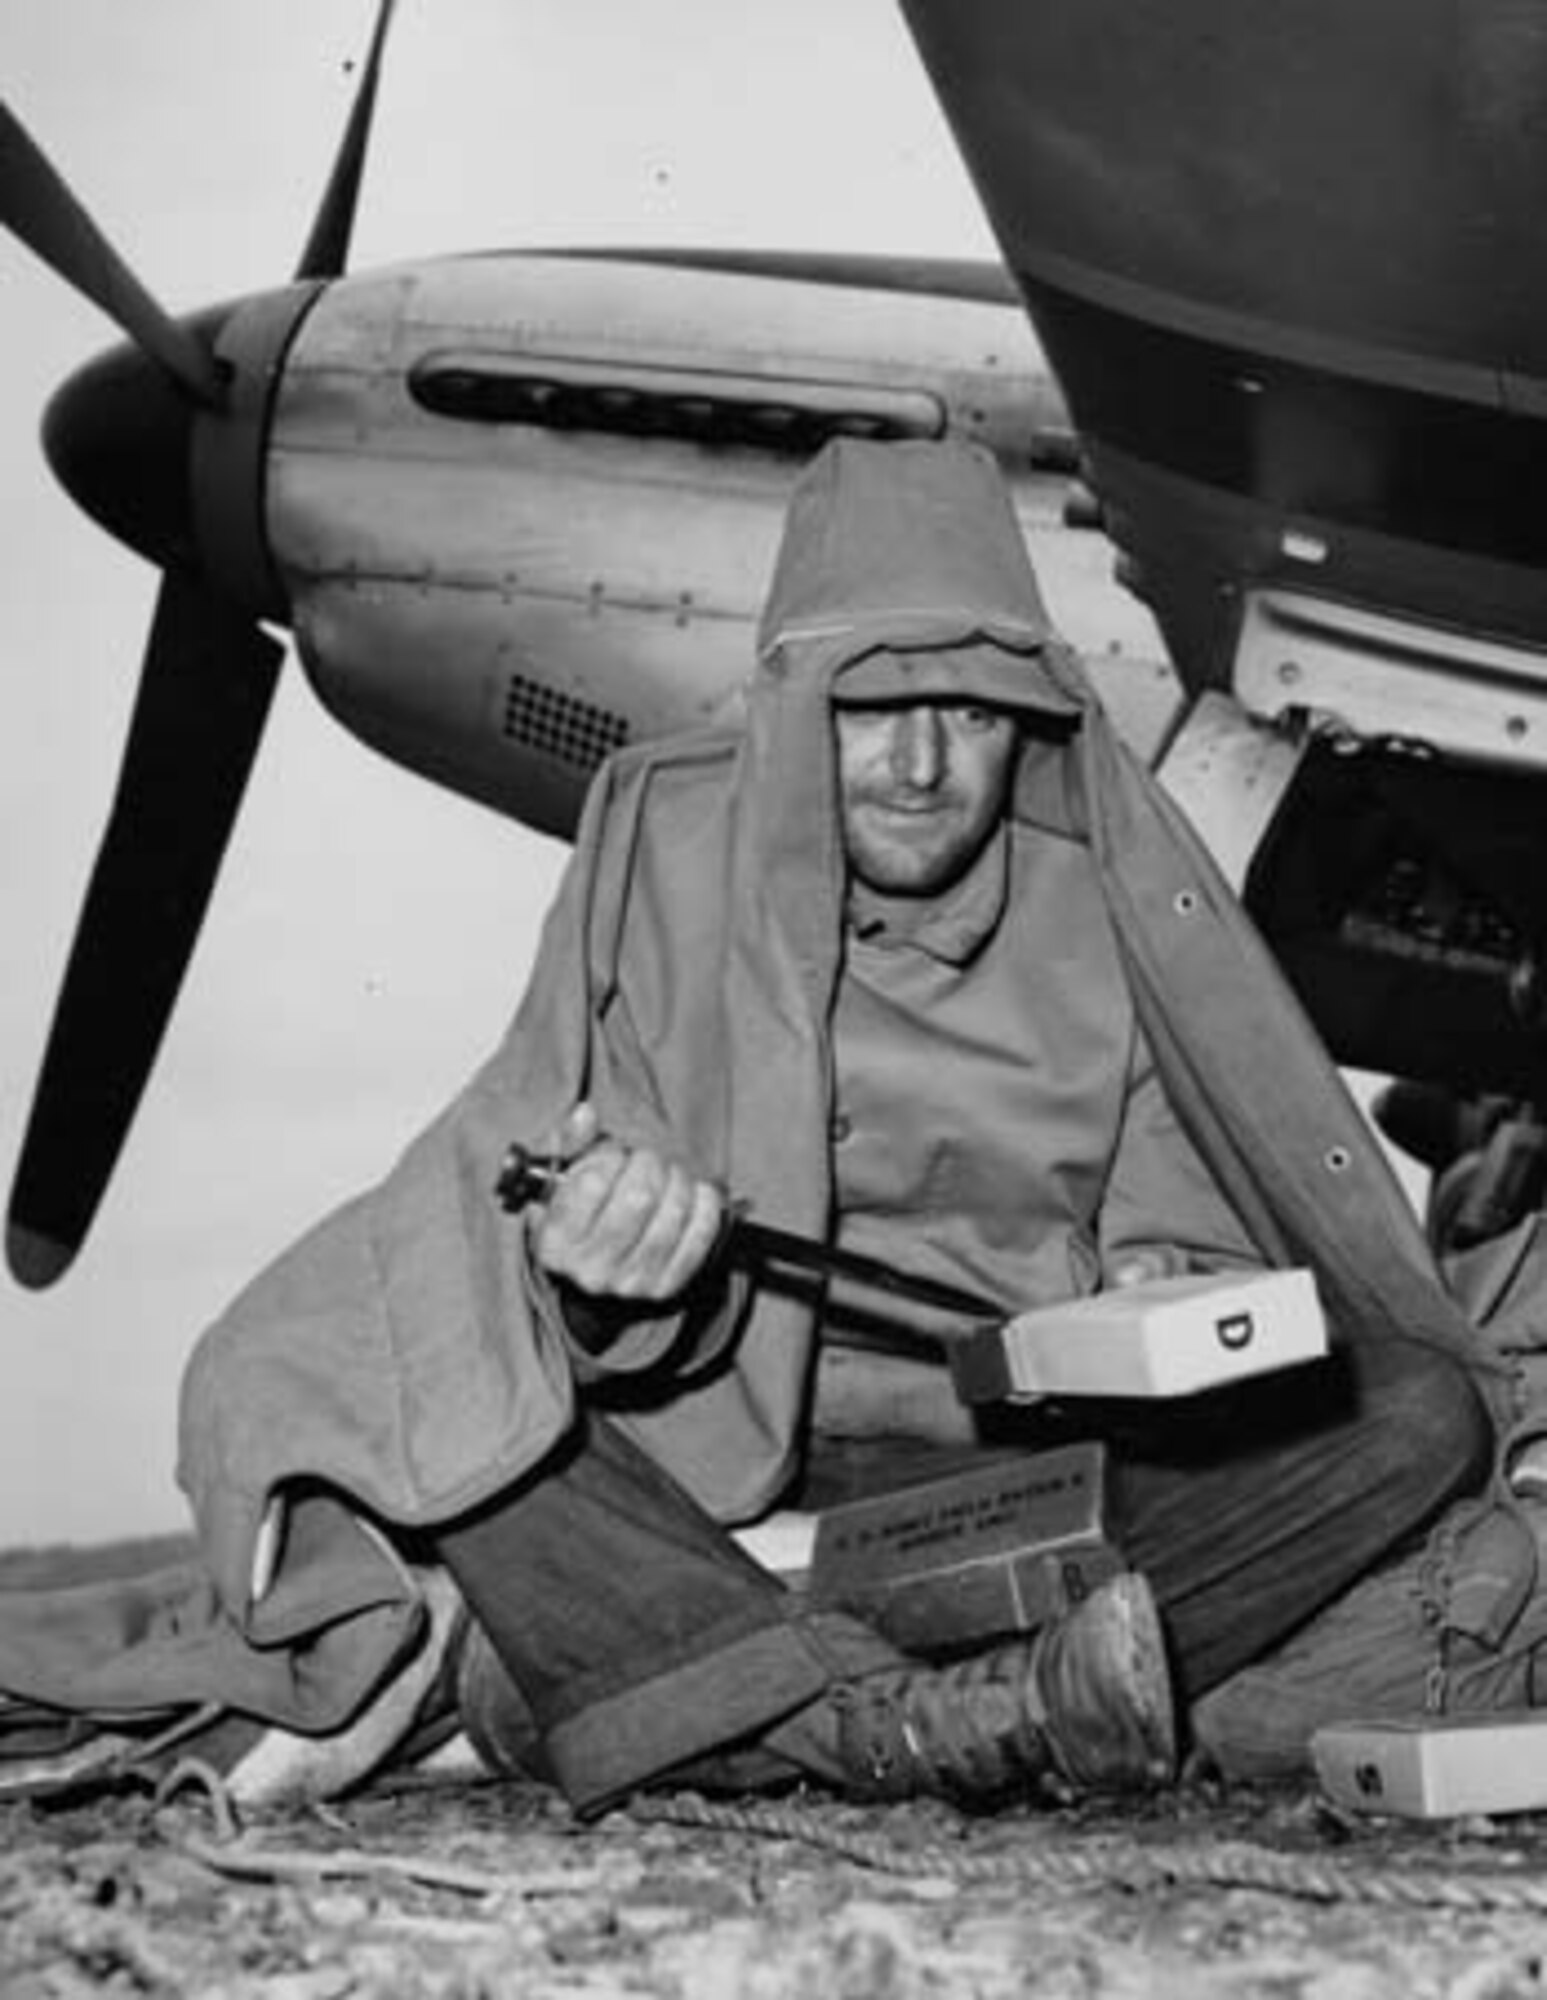 Huddled under a canopy blanket beneath the Wing of his 7th Air Force P-51 fighter on Iwo Jima, Crew Chief S/Sgt. Anthony A. Belesi, cuts open dry K-rations. Mechanics remained on the flight line 14 hours from dawn to dark with no shelter.